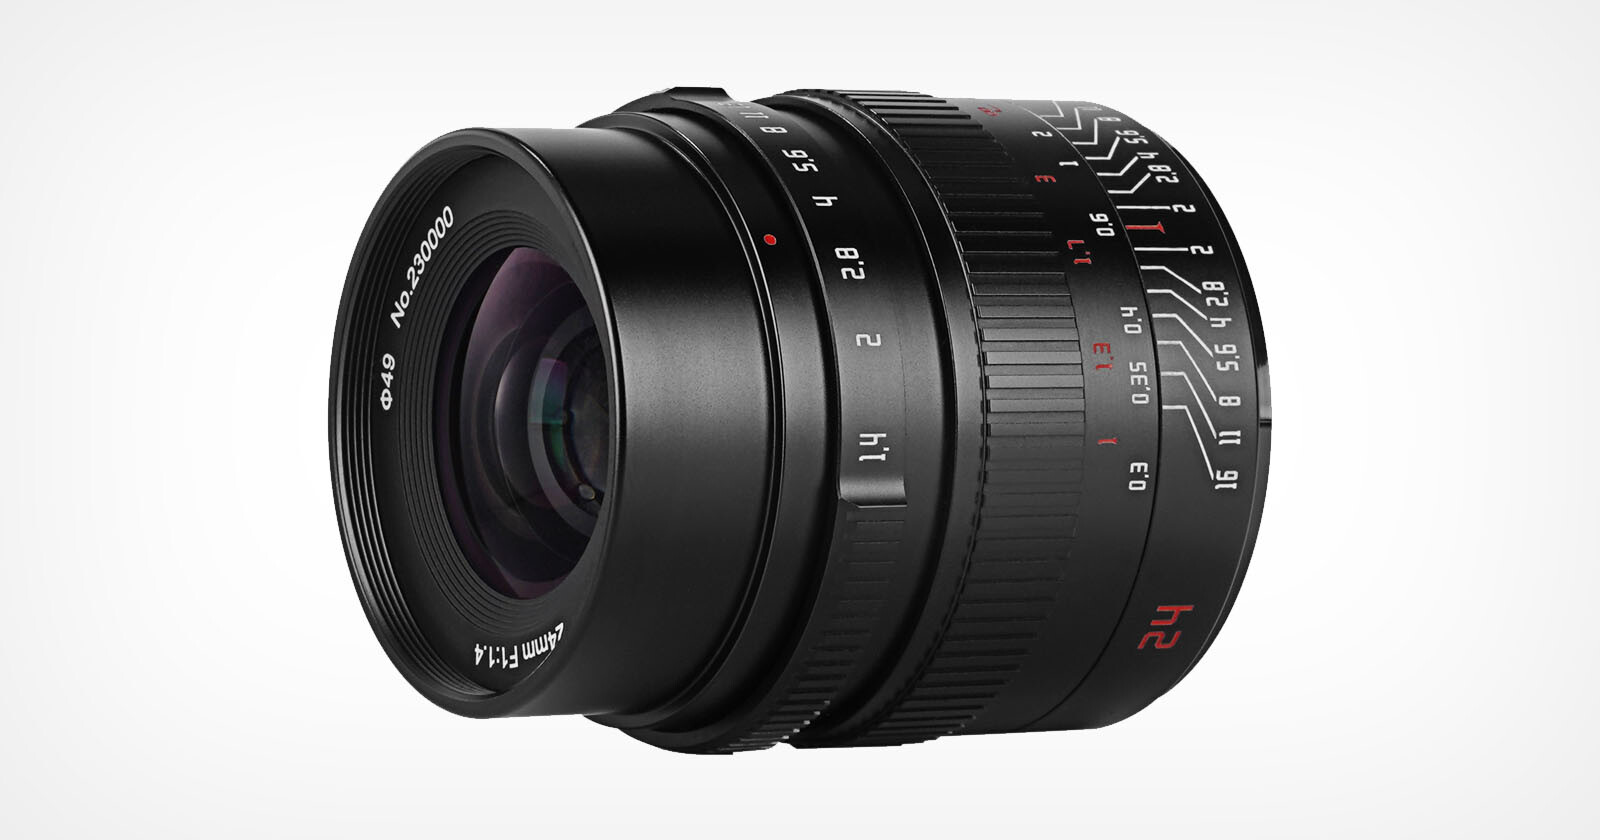 7Artisans Has a New Super-Cheap 24mm f/1.4 for APS-C Cameras